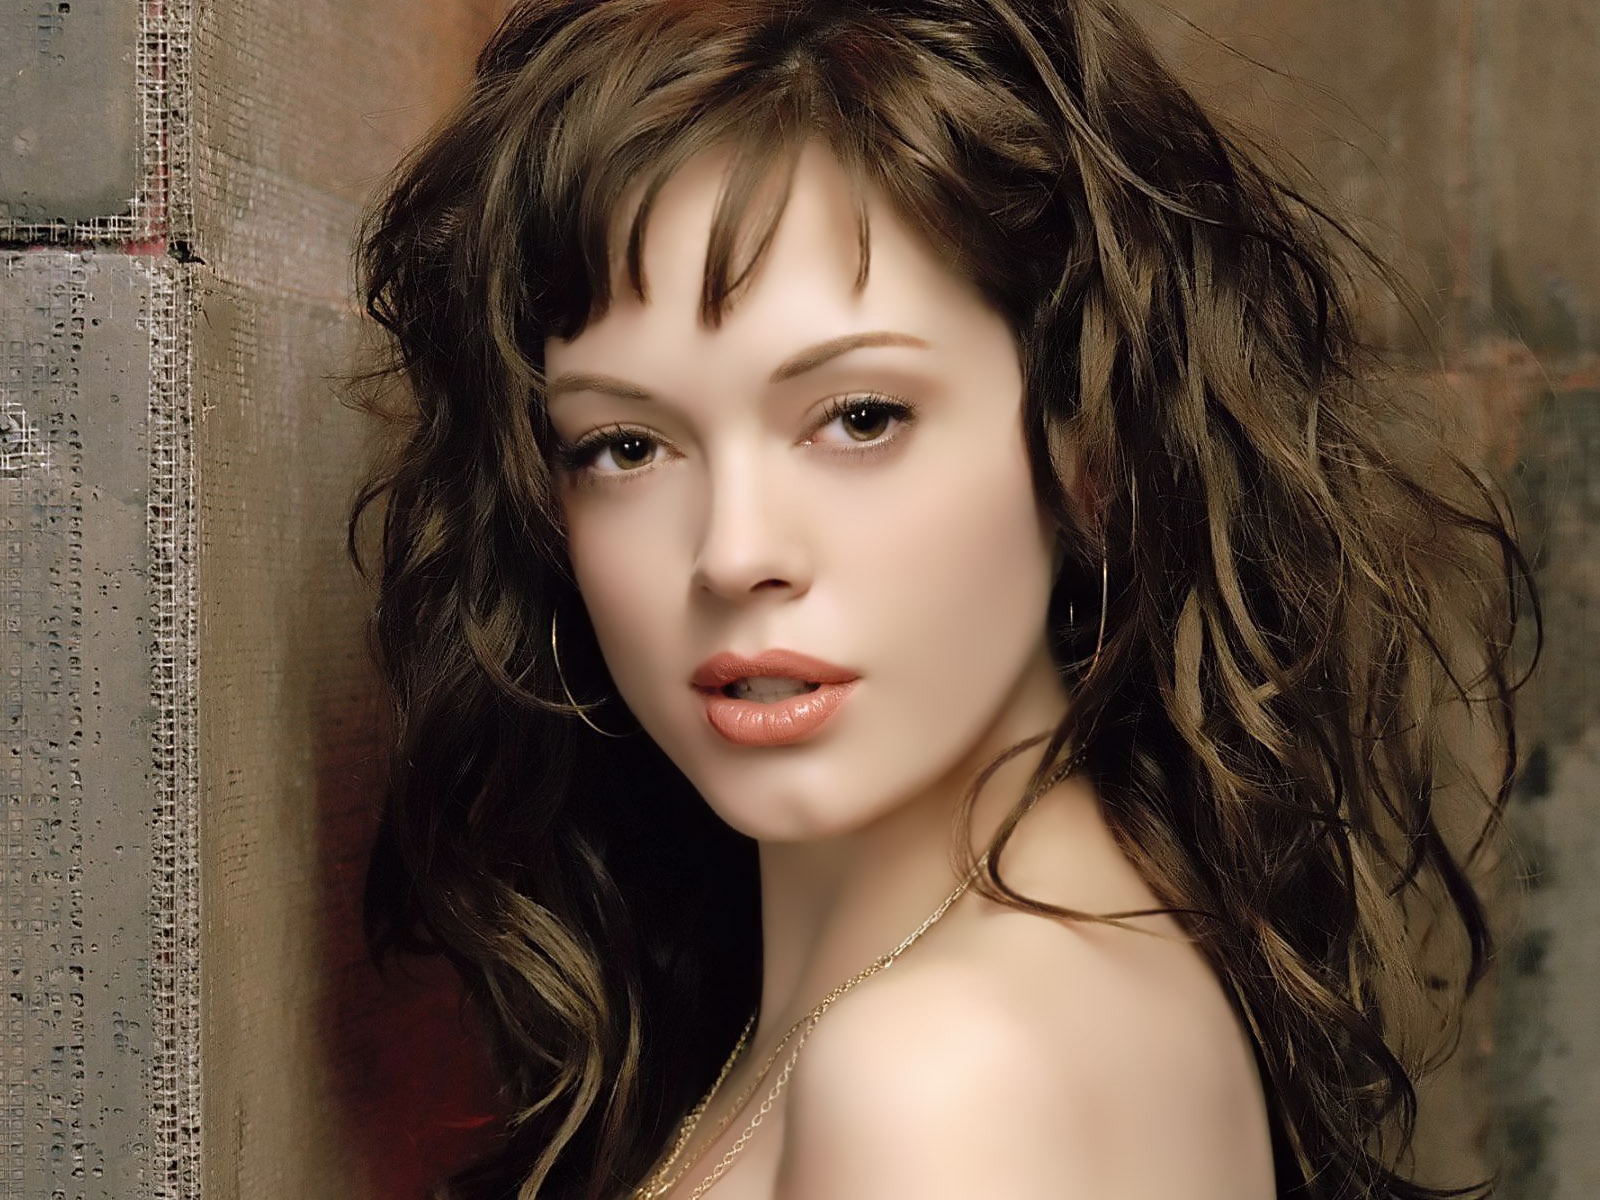 Cool Rose Mcgowan Actress for 1600 x 1200 resolution